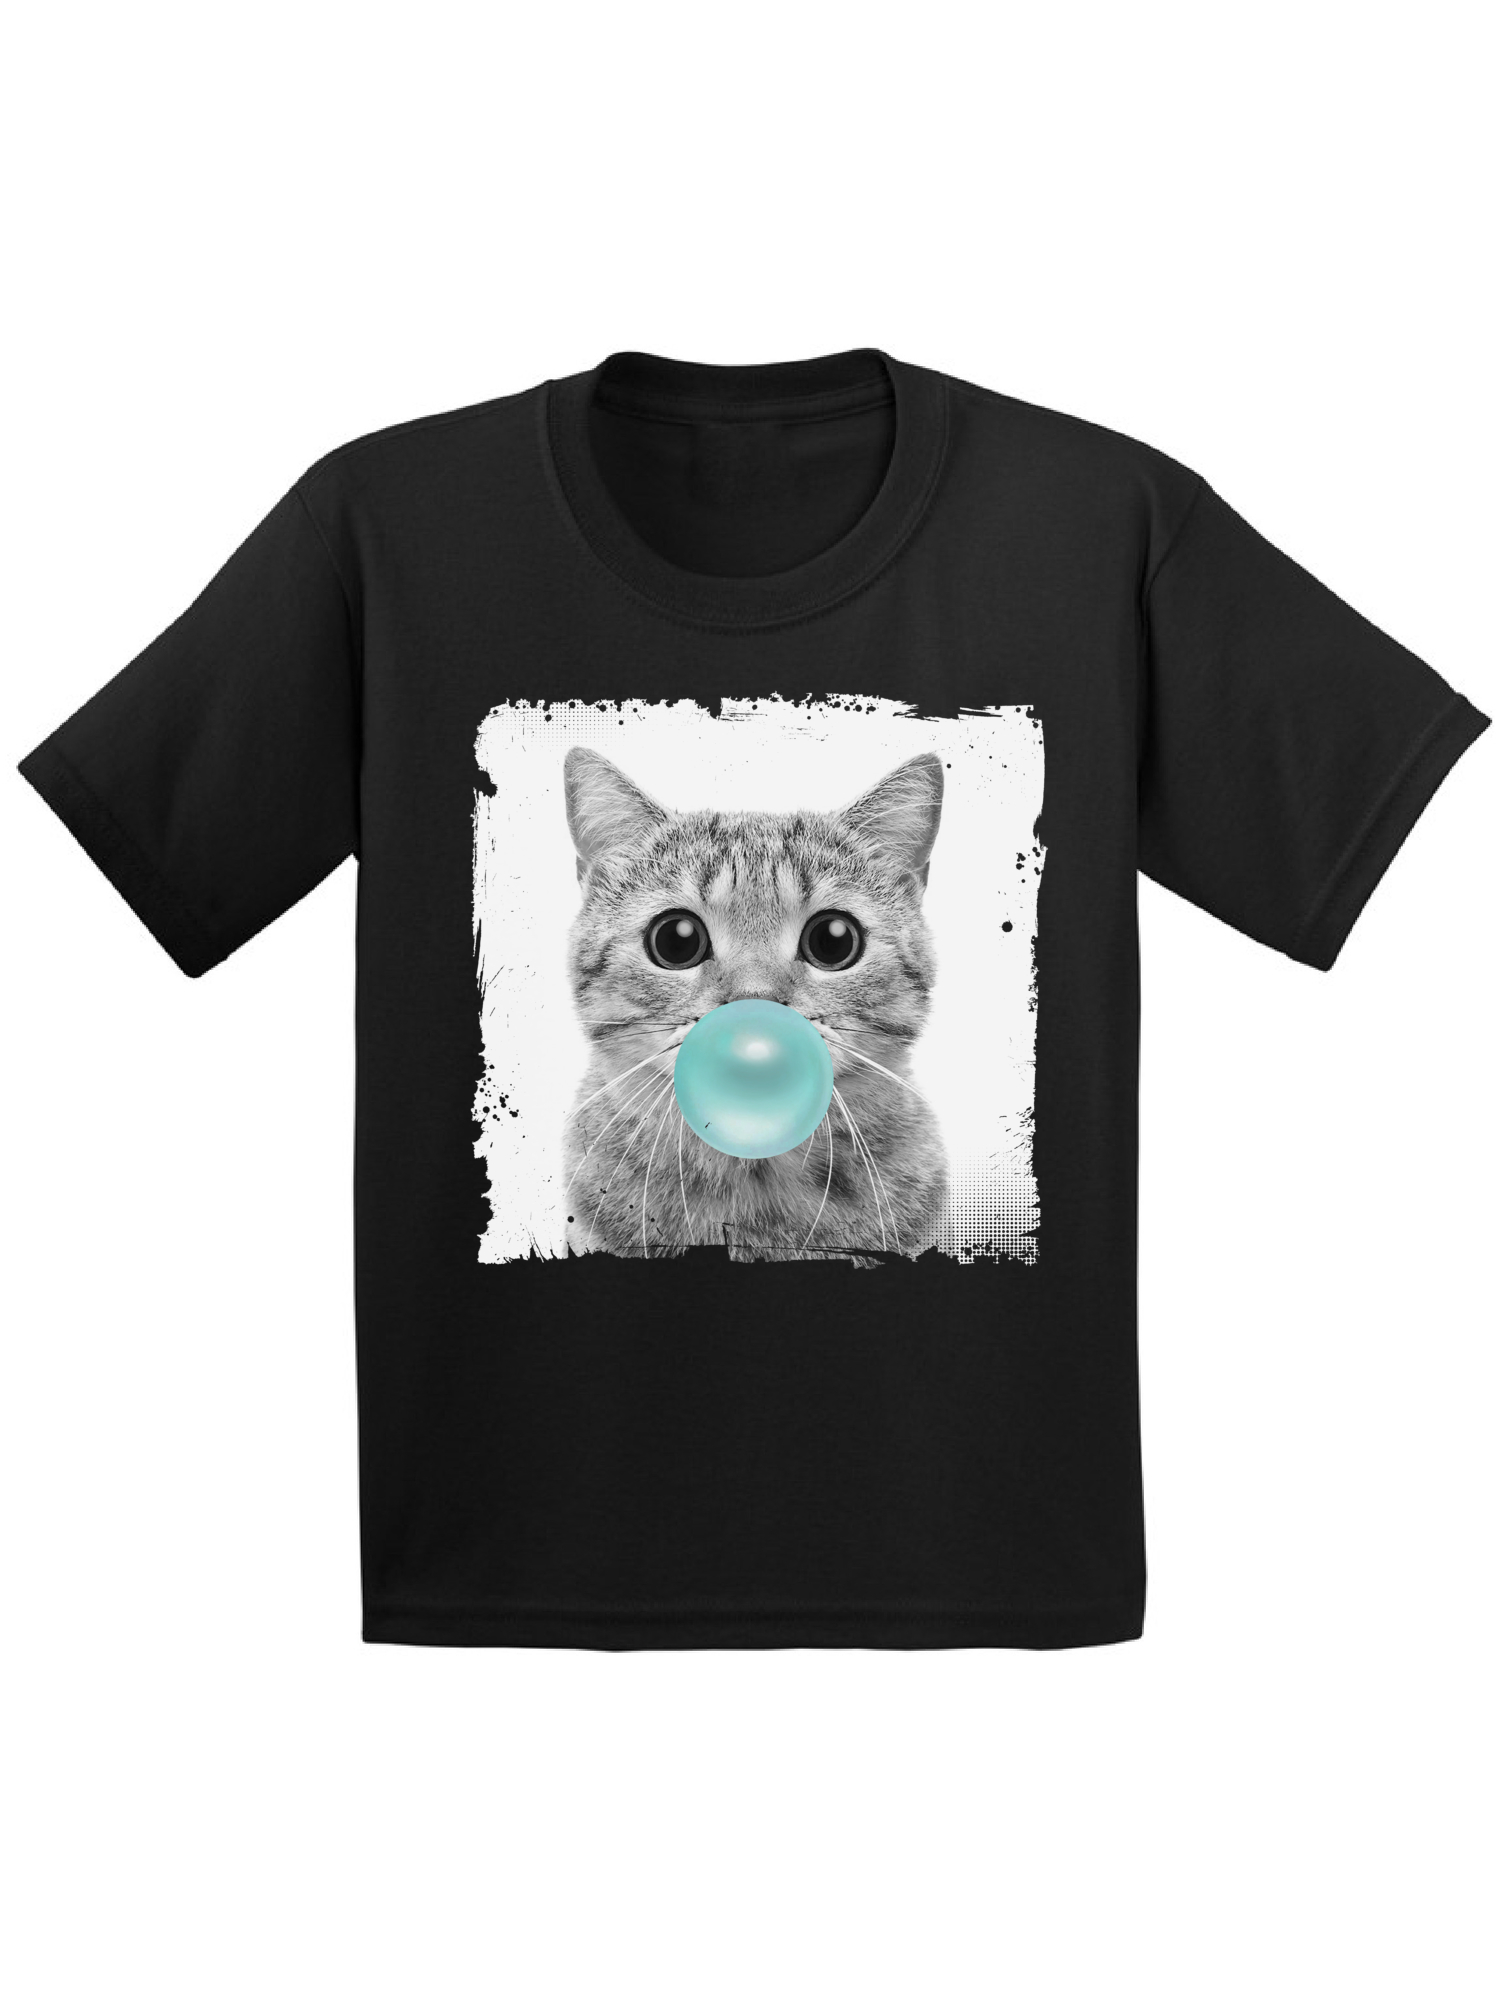 Awkward Styles Cat Blowing Blue Gum Shirt Cat Lovers Lovely Gifts for Kids Funny Animal Youth Shirt Cute Animal Lovers Clothes New Kids T Shirt Gifts for Kids Little Cat Clothing Childrens Outfit - image 1 of 4